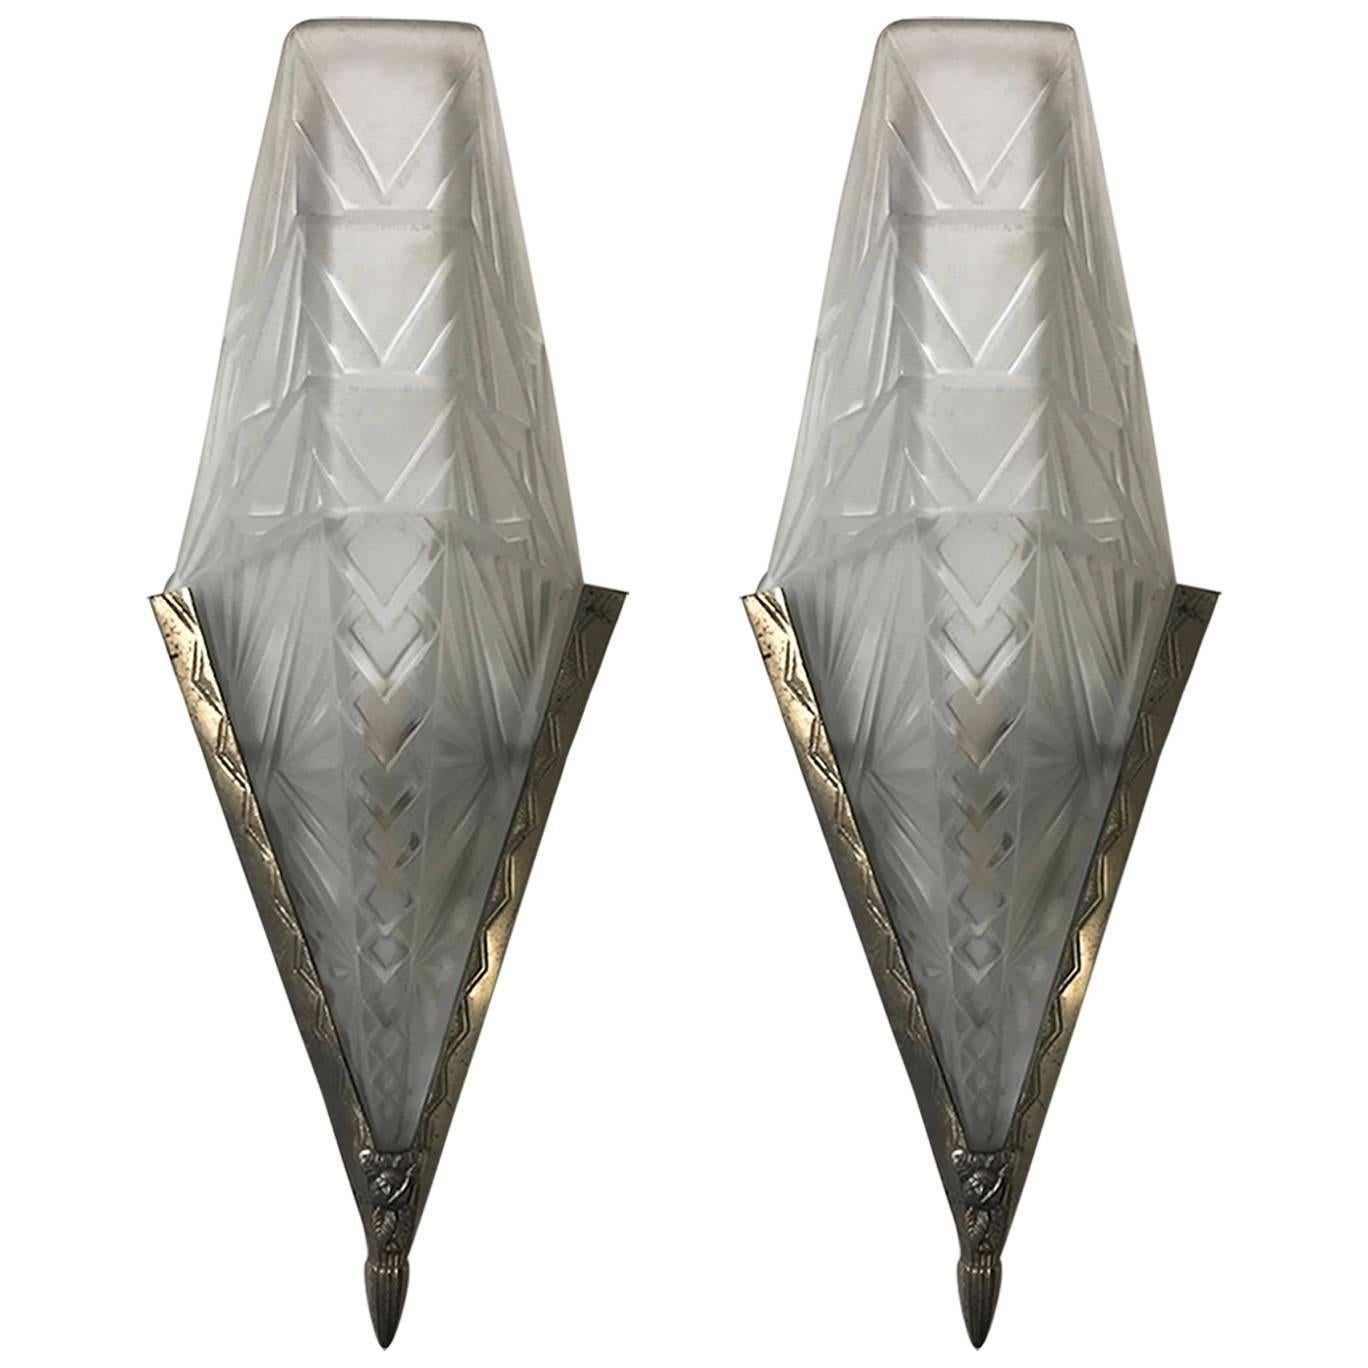 Pair of French Art Deco Geometric Wall Sconces by E.J.G. For Sale